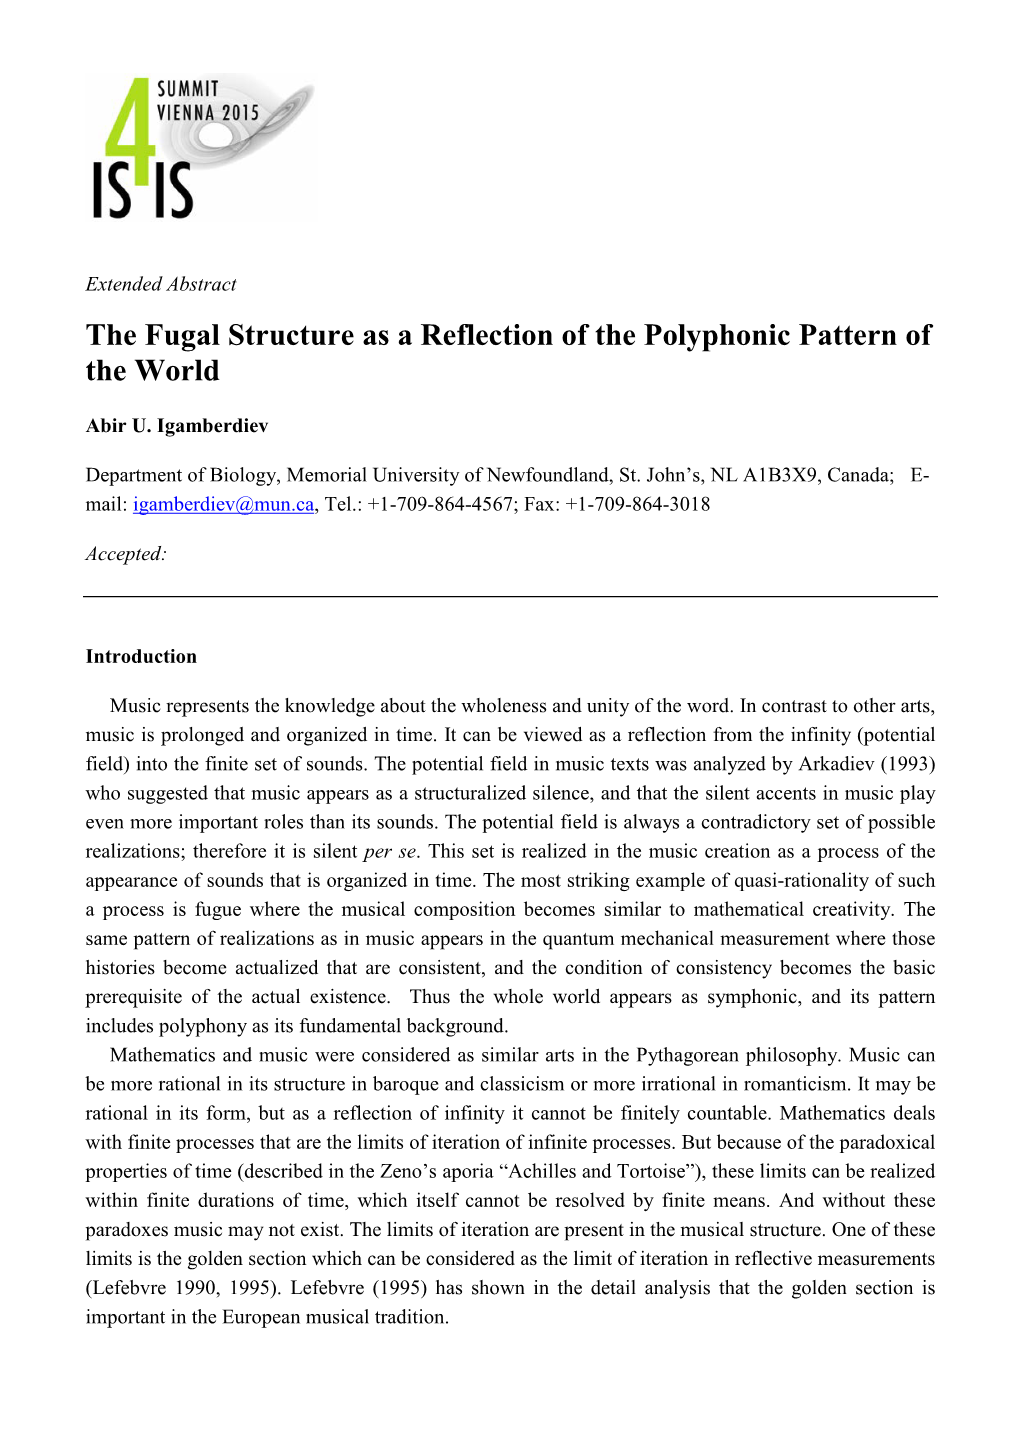 The Fugal Structure As a Reflection of the Polyphonic Pattern of the World